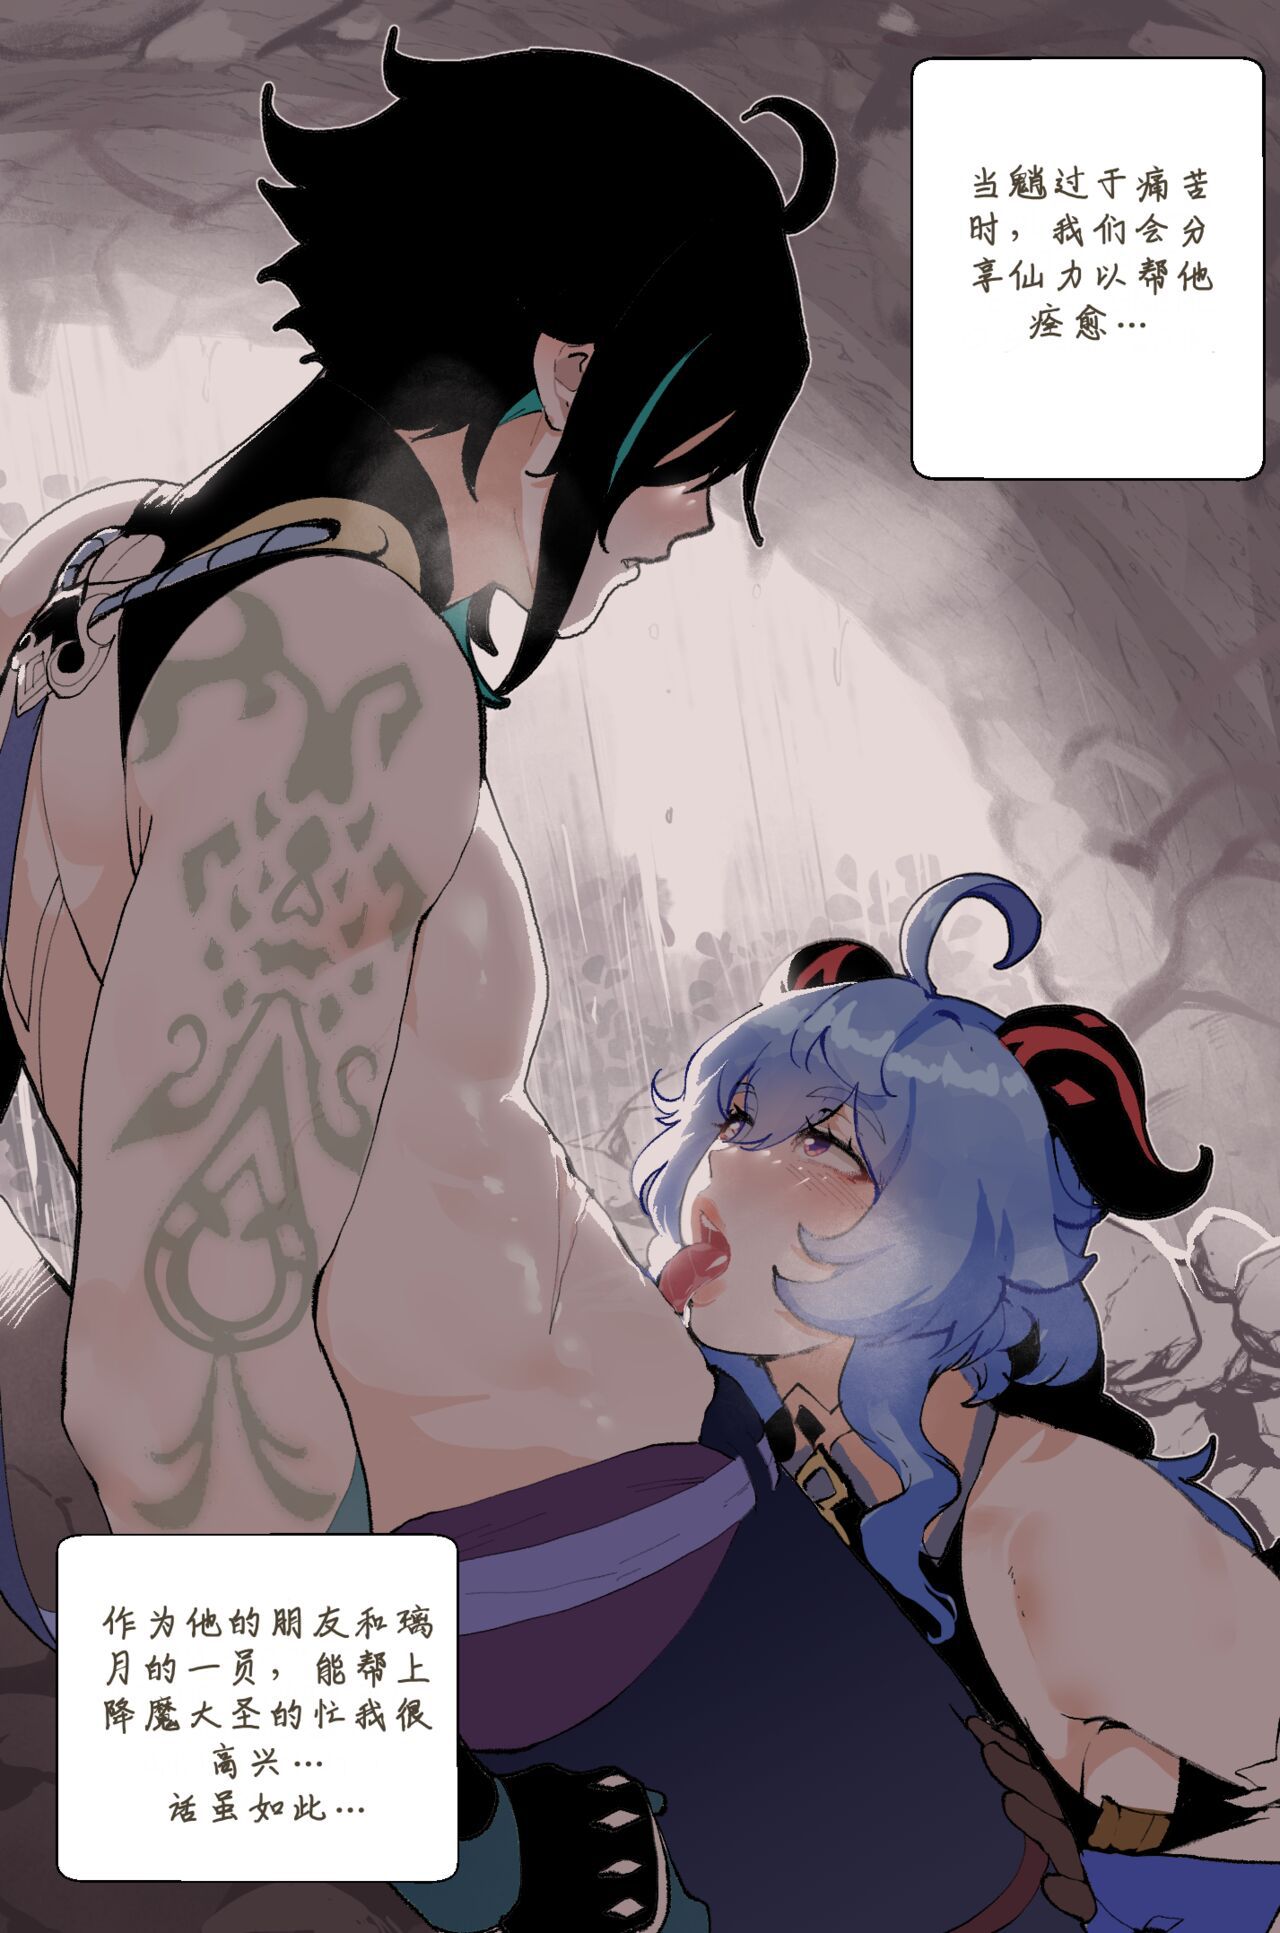 ThiccWithaQ [Chinese] [Ongoing] ThiccWithaQ 【Neko汉化】 58